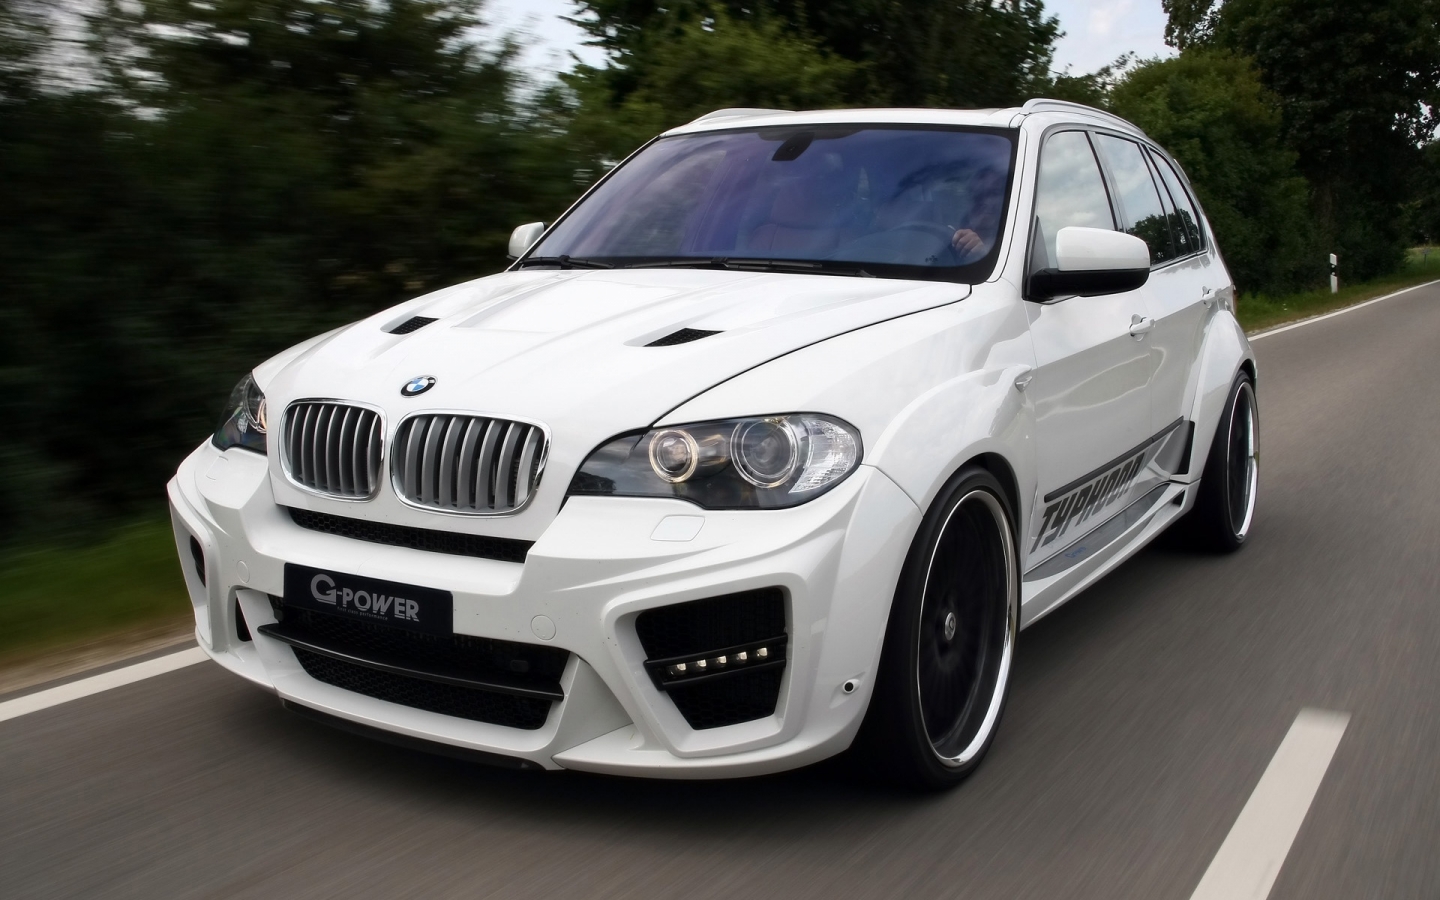 BMW X5 Typhoon RS 2010 G Power for 1440 x 900 widescreen resolution